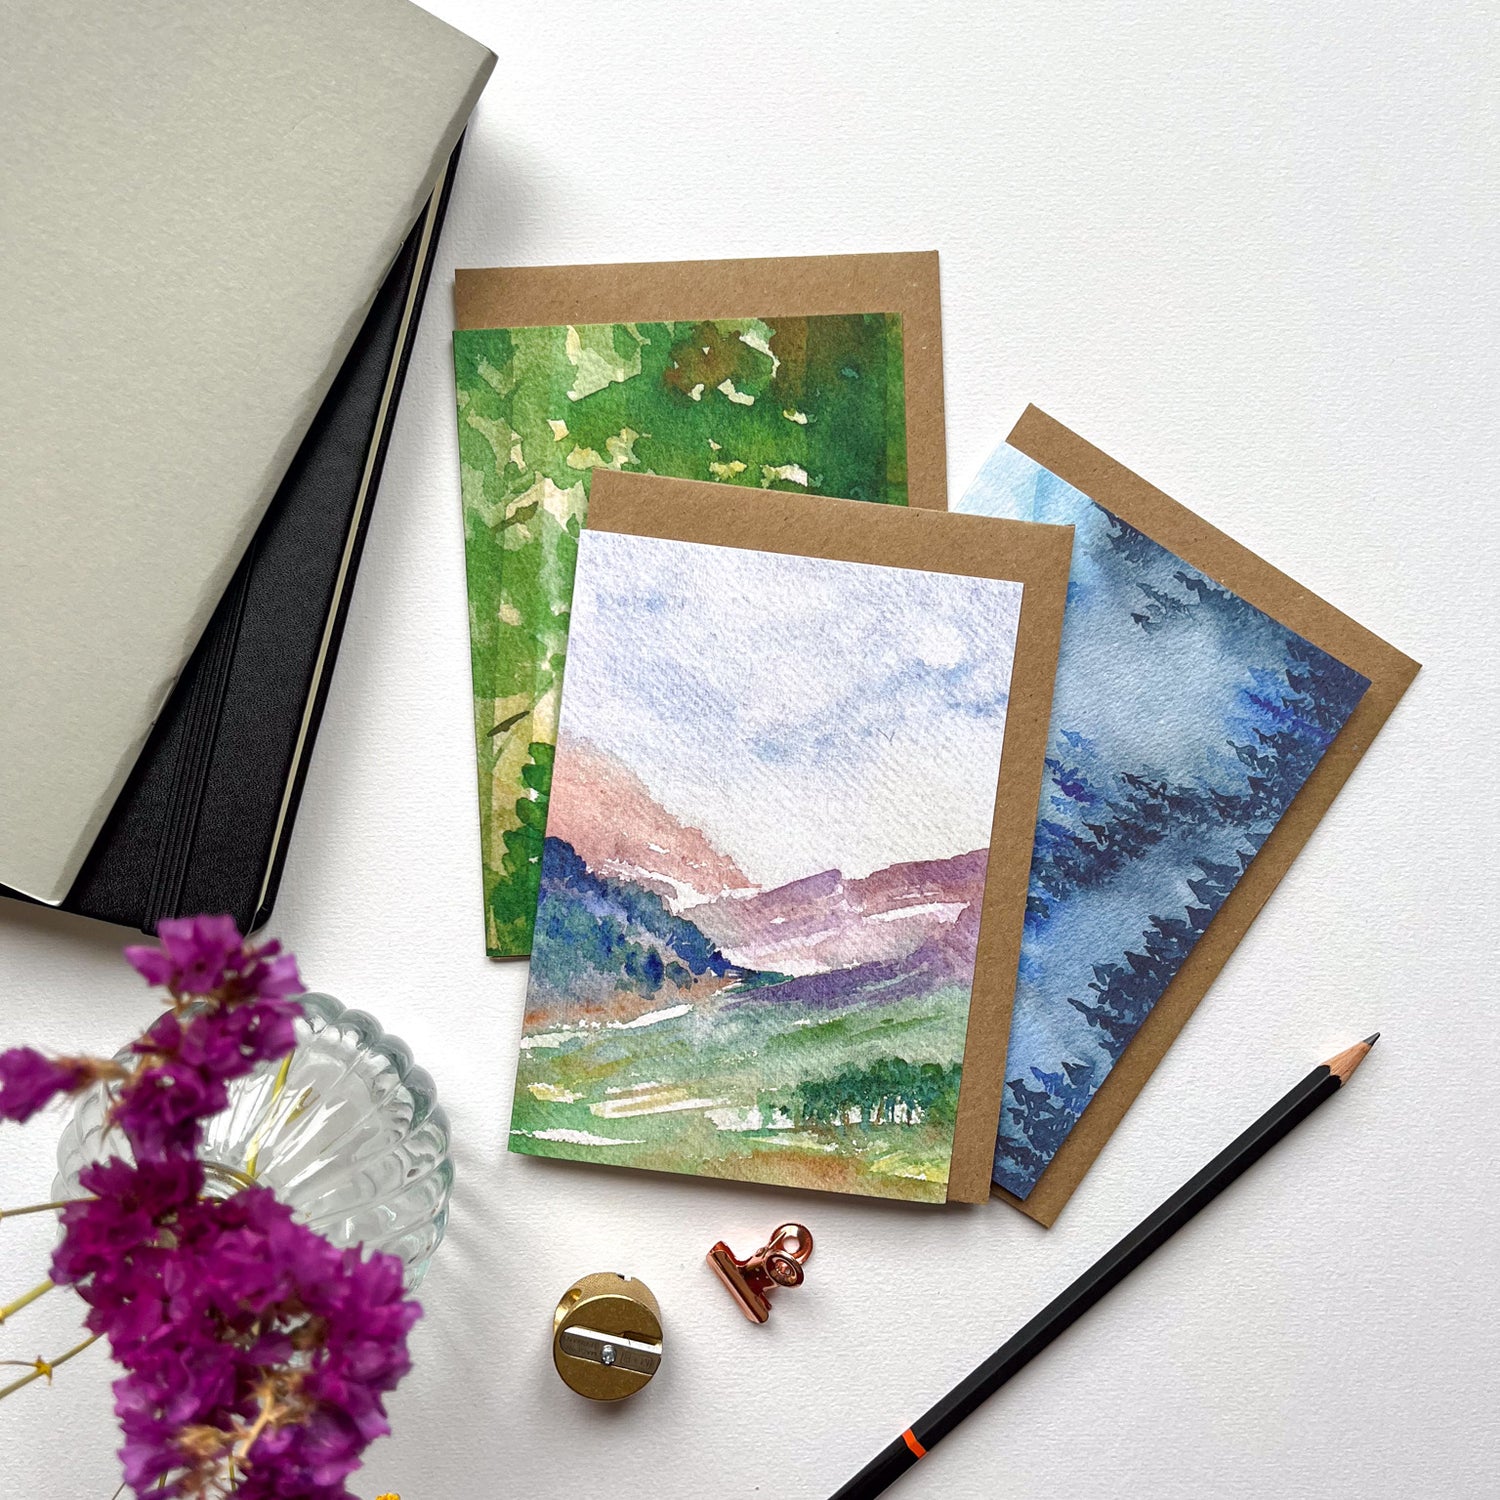 Three greeting cards flat on a table with watercolour landscape designs